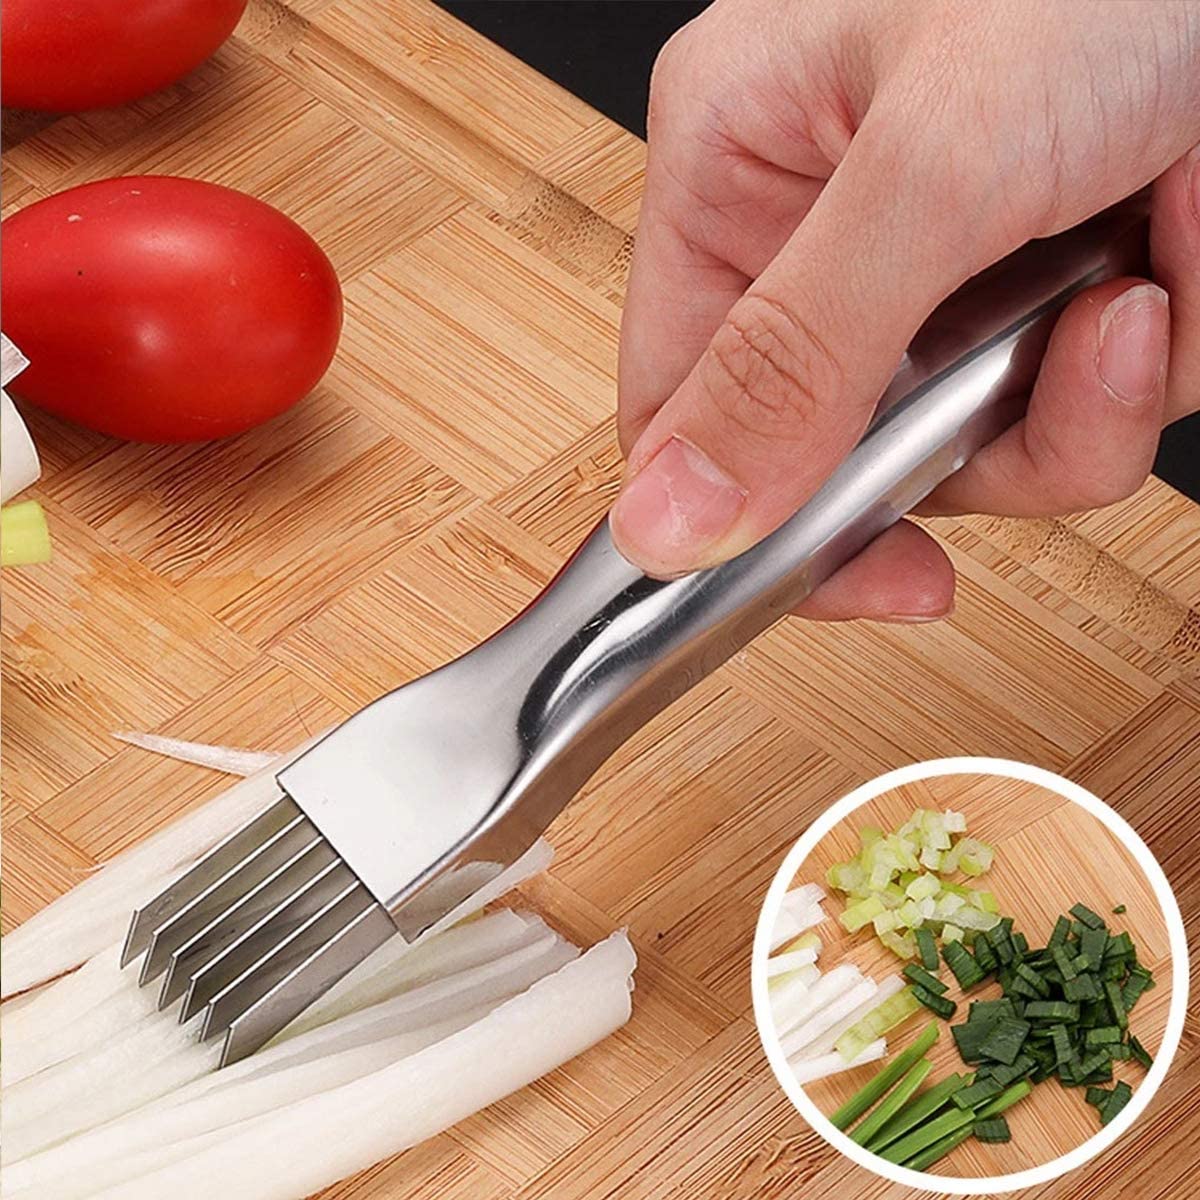 PCTC Onion Cutter Green Onion Shredder Slicer Stainless Steel Onion Cutter  Graters Shred Silk Knife Vegetable Chopper Slicer, Kitchen Tools(Green)